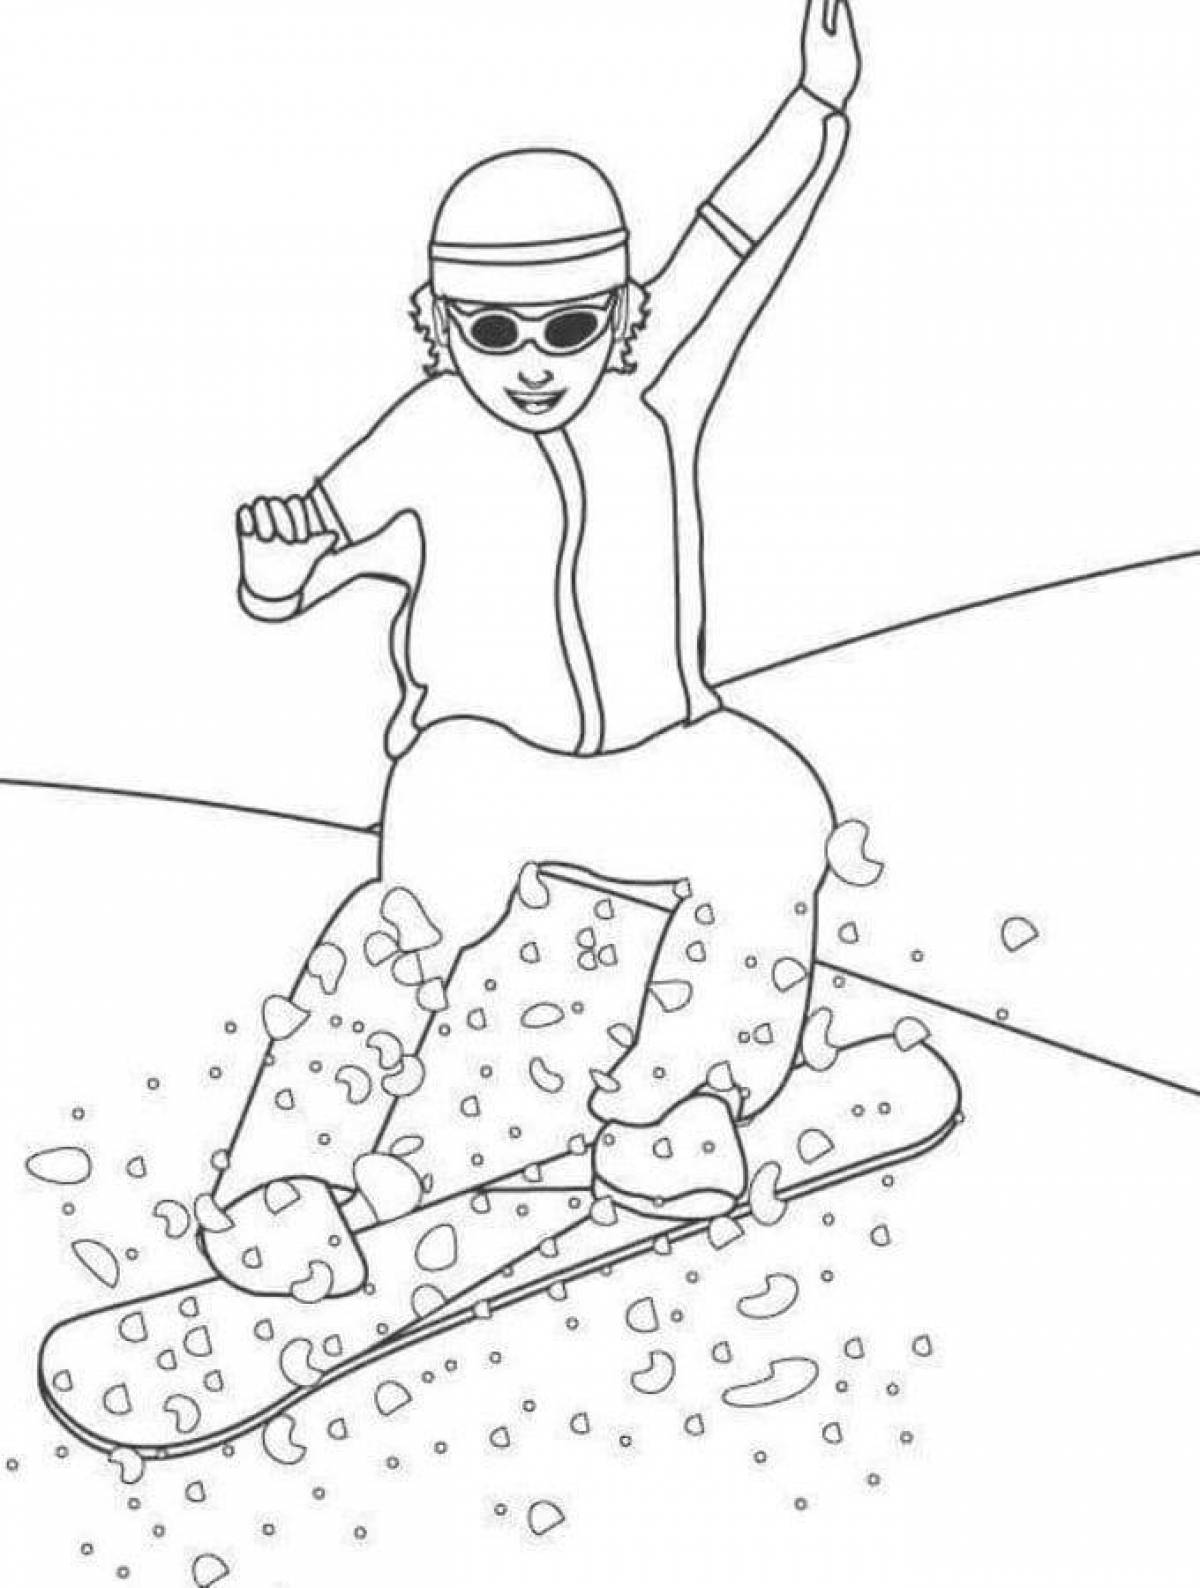 Children's coloring book about winter sports